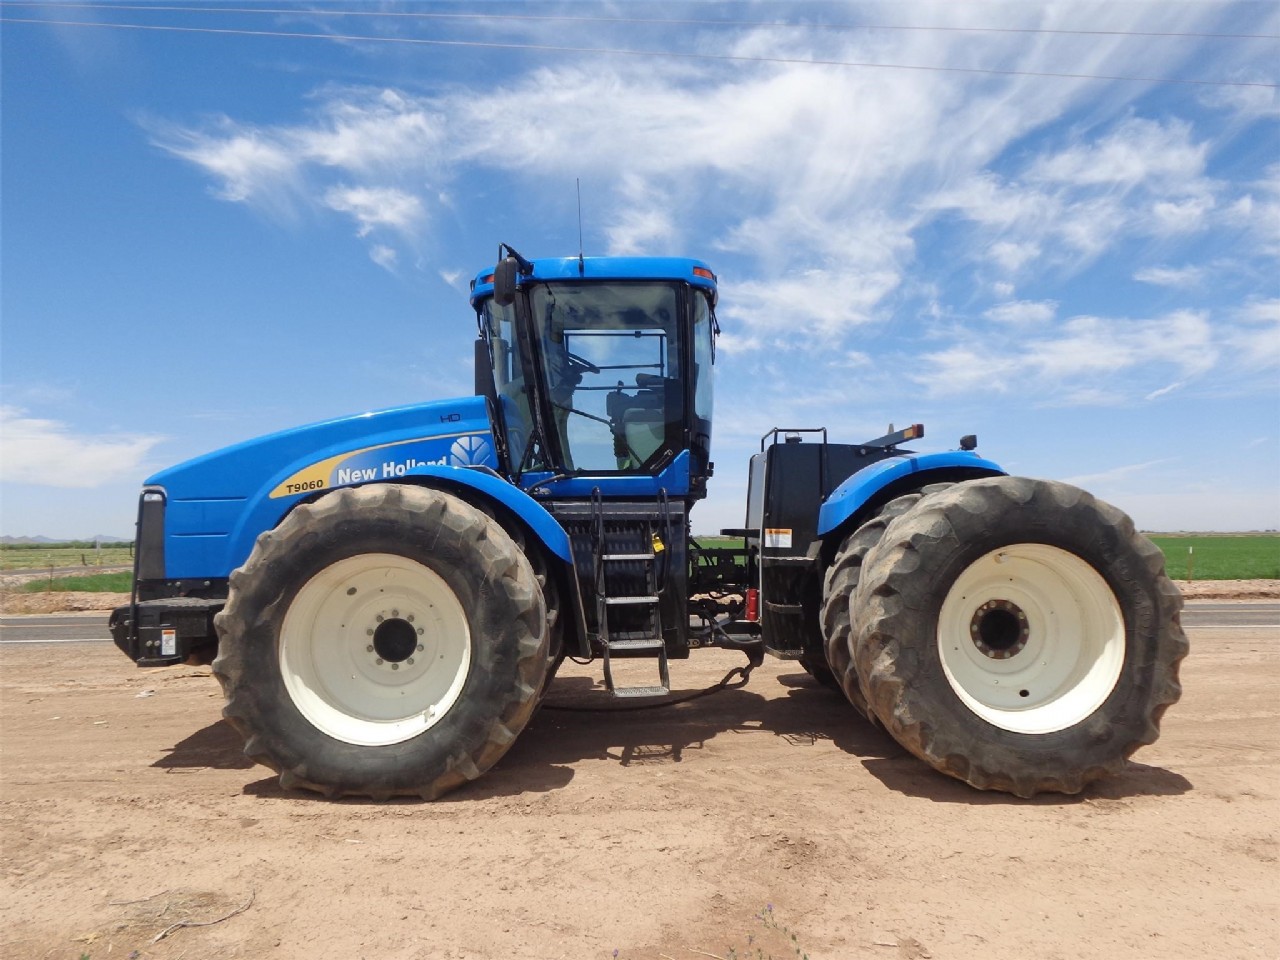 Fixing a hydraulic problem on a New Holland T9060 tractor